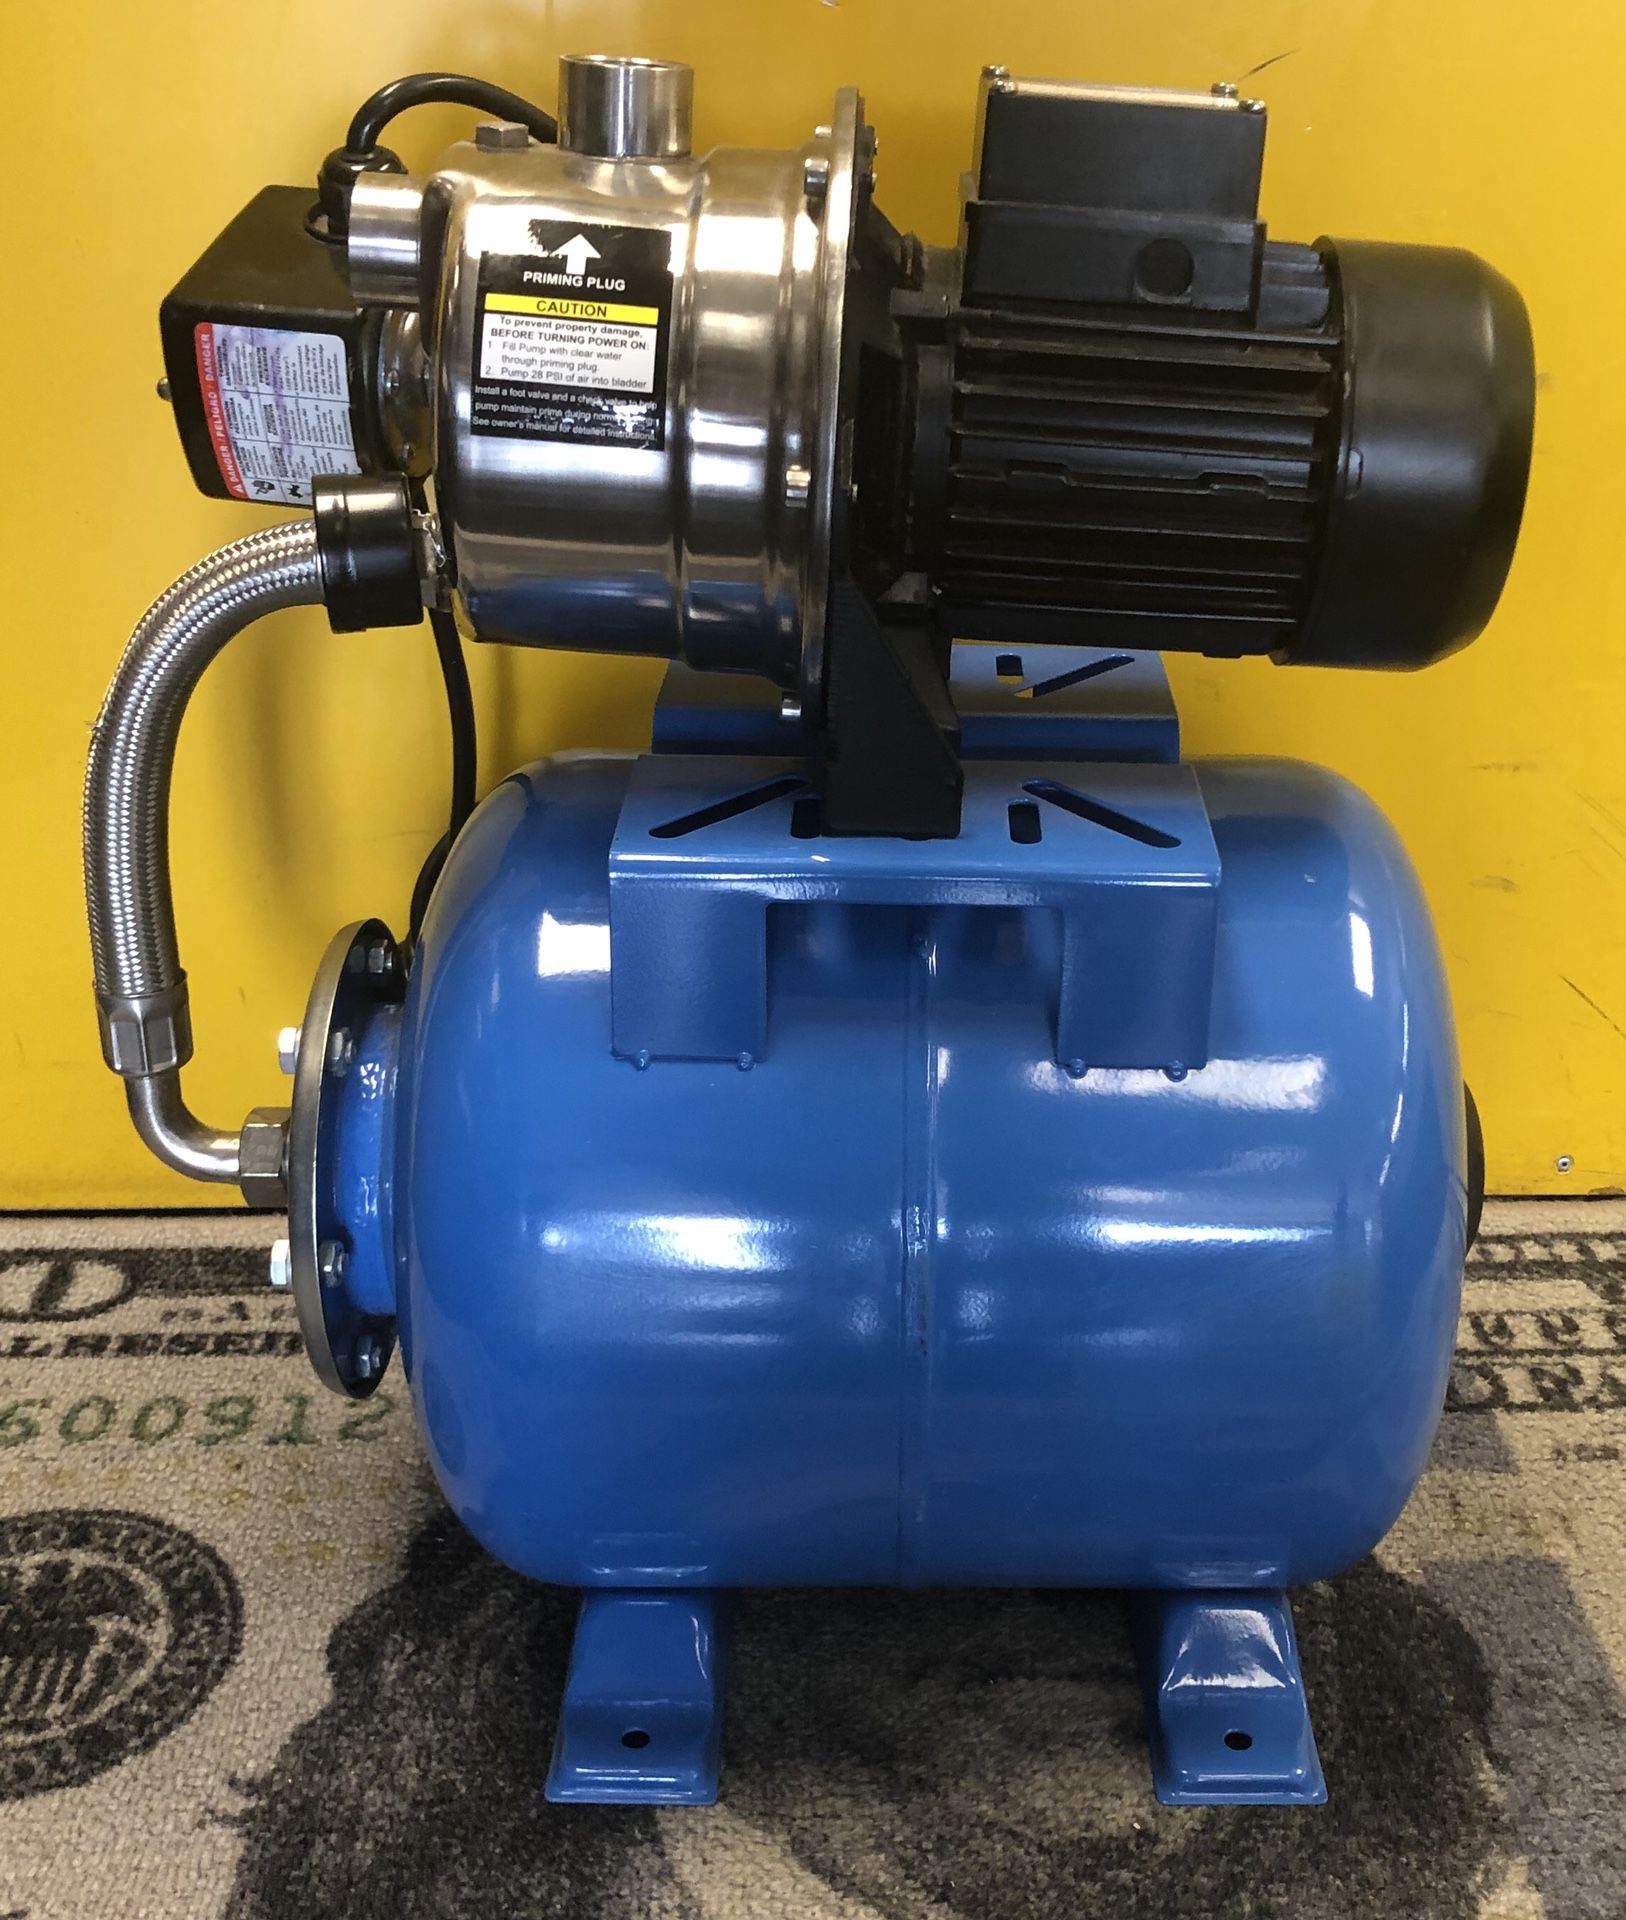 Pacific Hydrostar 69302 - 1 HP Shallow Well Pump Stainless Steel Housing - LIKE NEW CONDITION